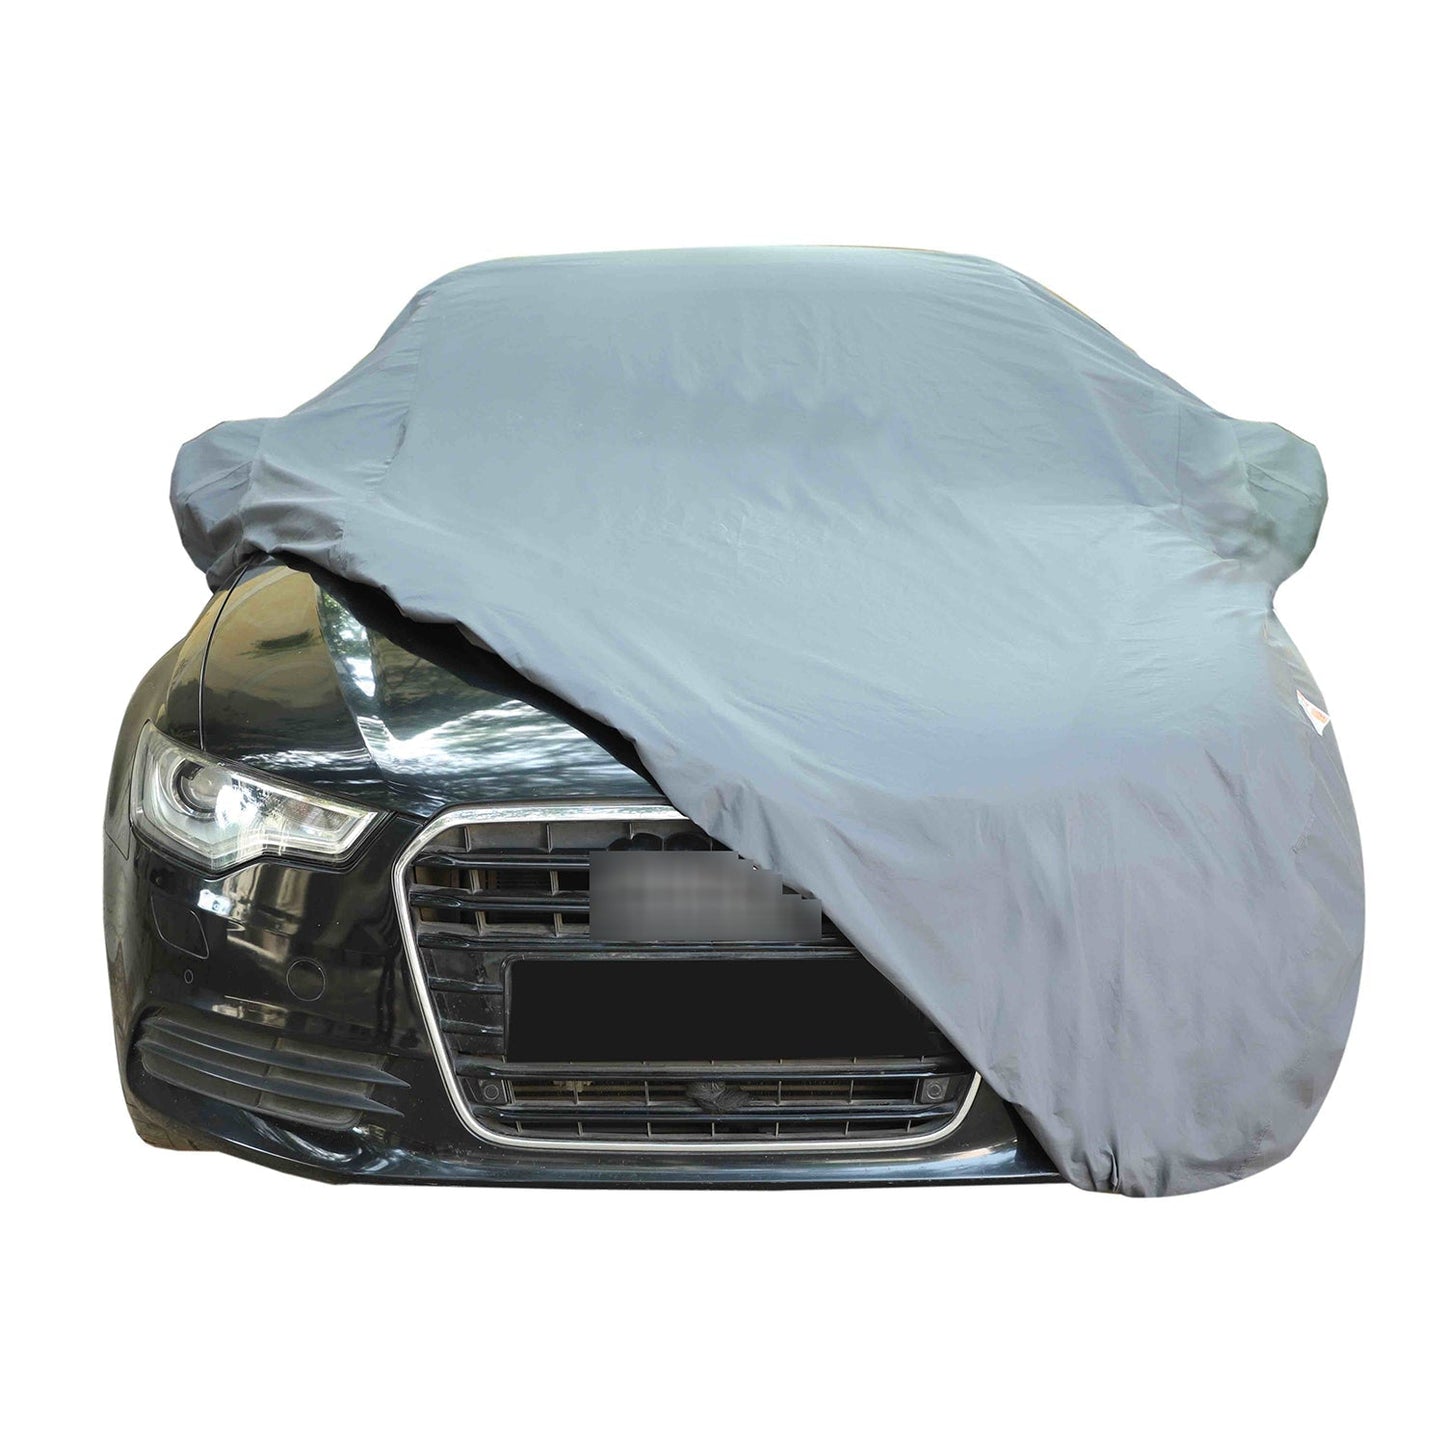 Oshotto Dark Grey 100% Anti Reflective, dustproof and Water Proof Car Body Cover with Mirror Pockets For Volvo S60